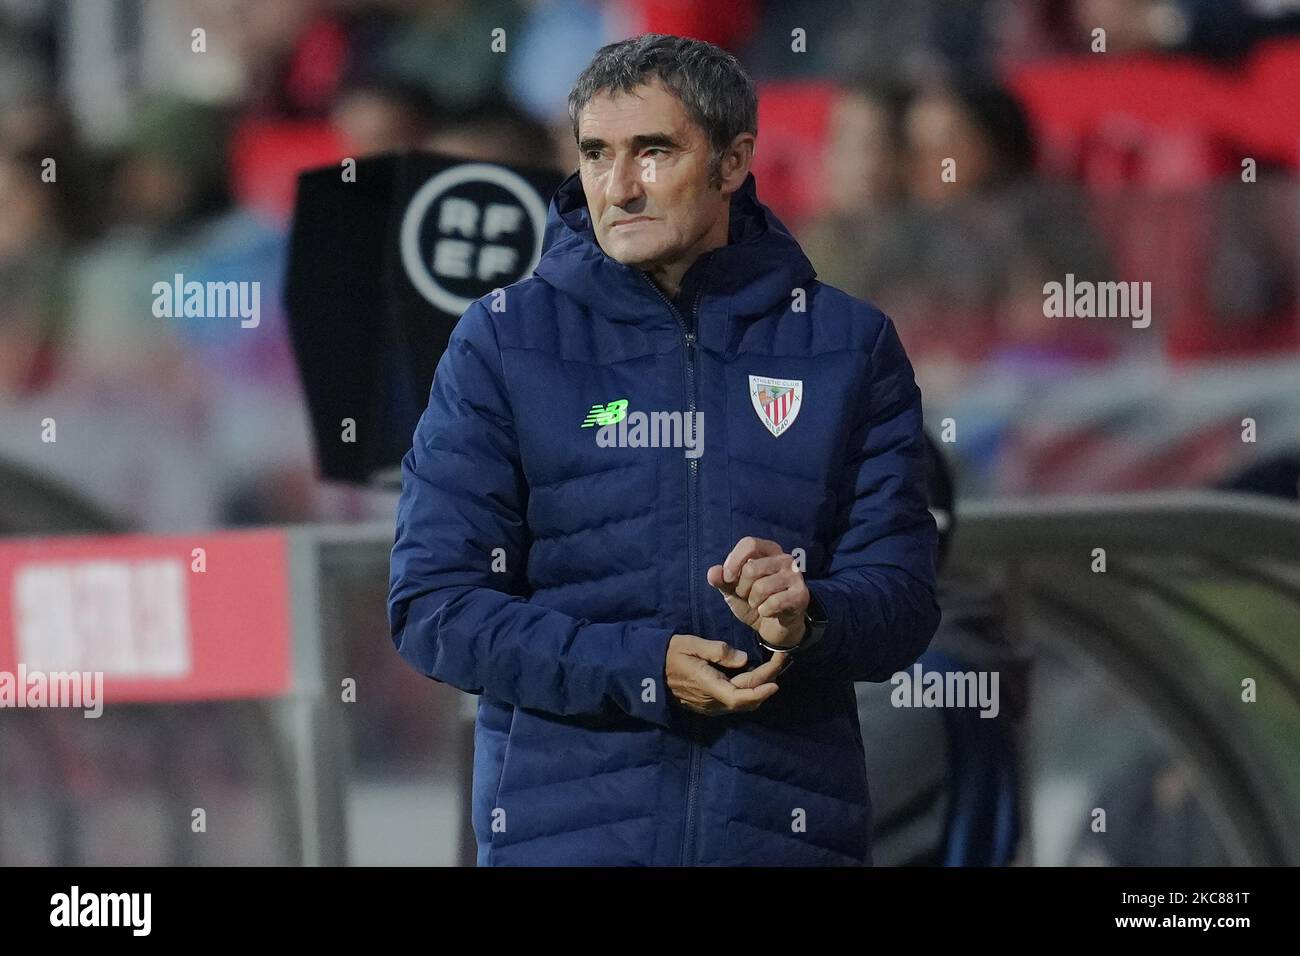 Athletic Club head coach Ernesto Valverde during the La Liga match between Girona FC and Athletic Club played at Montilivi Stadium on November 04, 2022 in Girona, Spain. (Photo by Sergio Ruiz / PRESSIN) Credit: PRESSINPHOTO SPORTS AGENCY/Alamy Live News Stock Photo